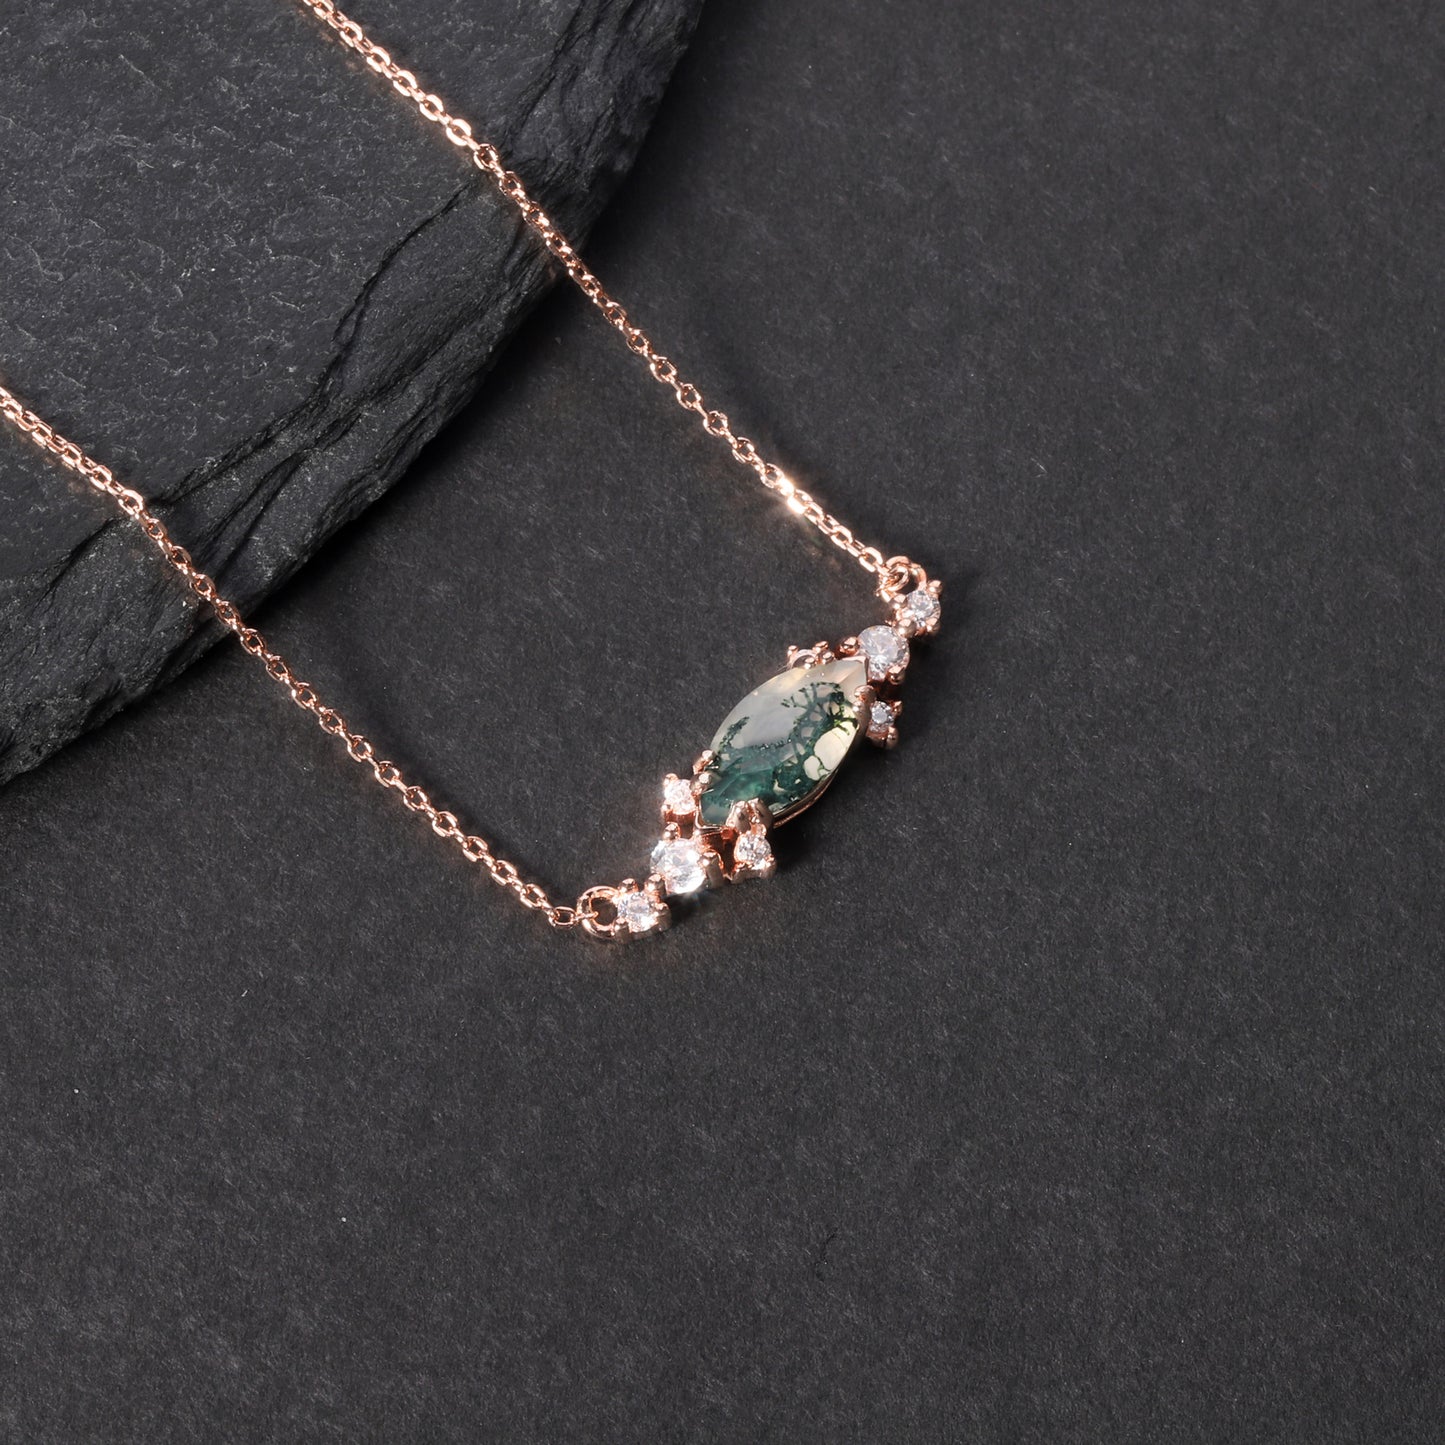 1.5ct Cluster Vintage Marquise Cut Moss Agate Necklace